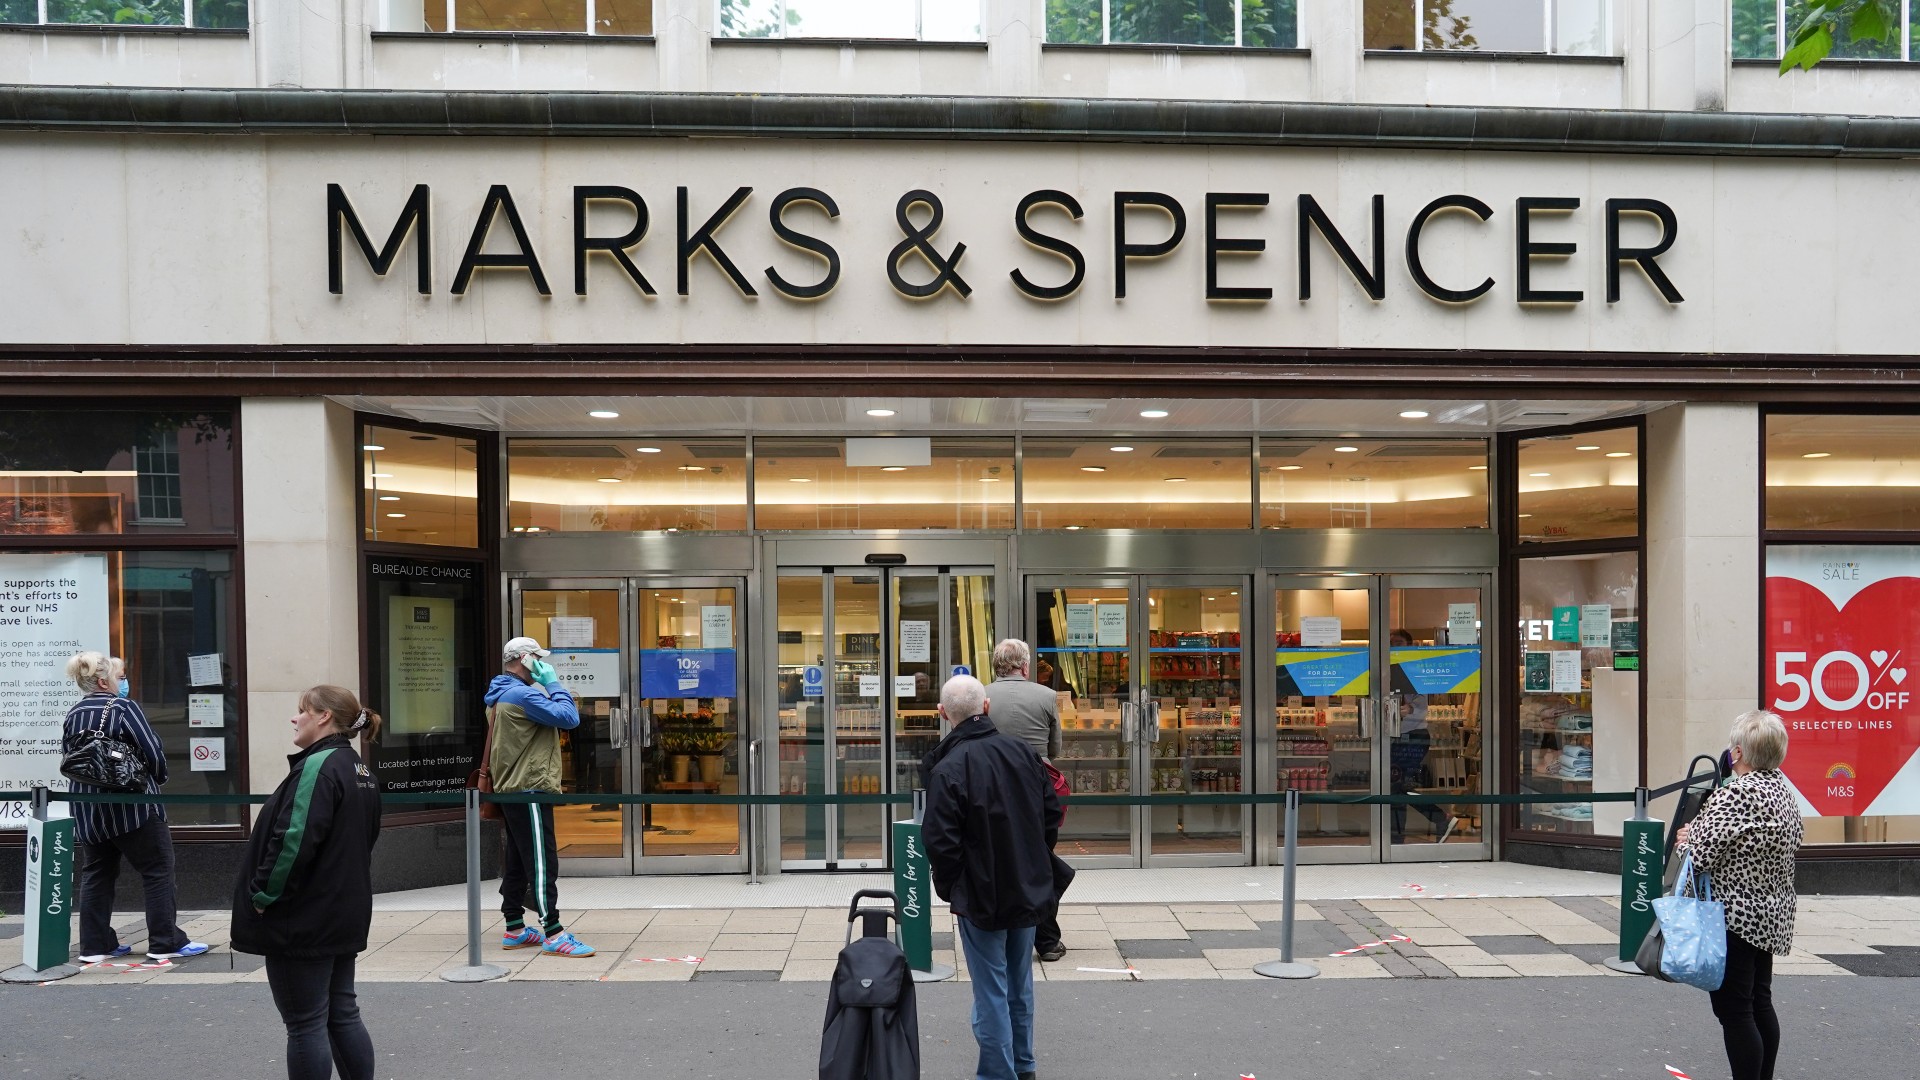 10 Iconic British High Street Stores: From Harrods to Marks & Spencer